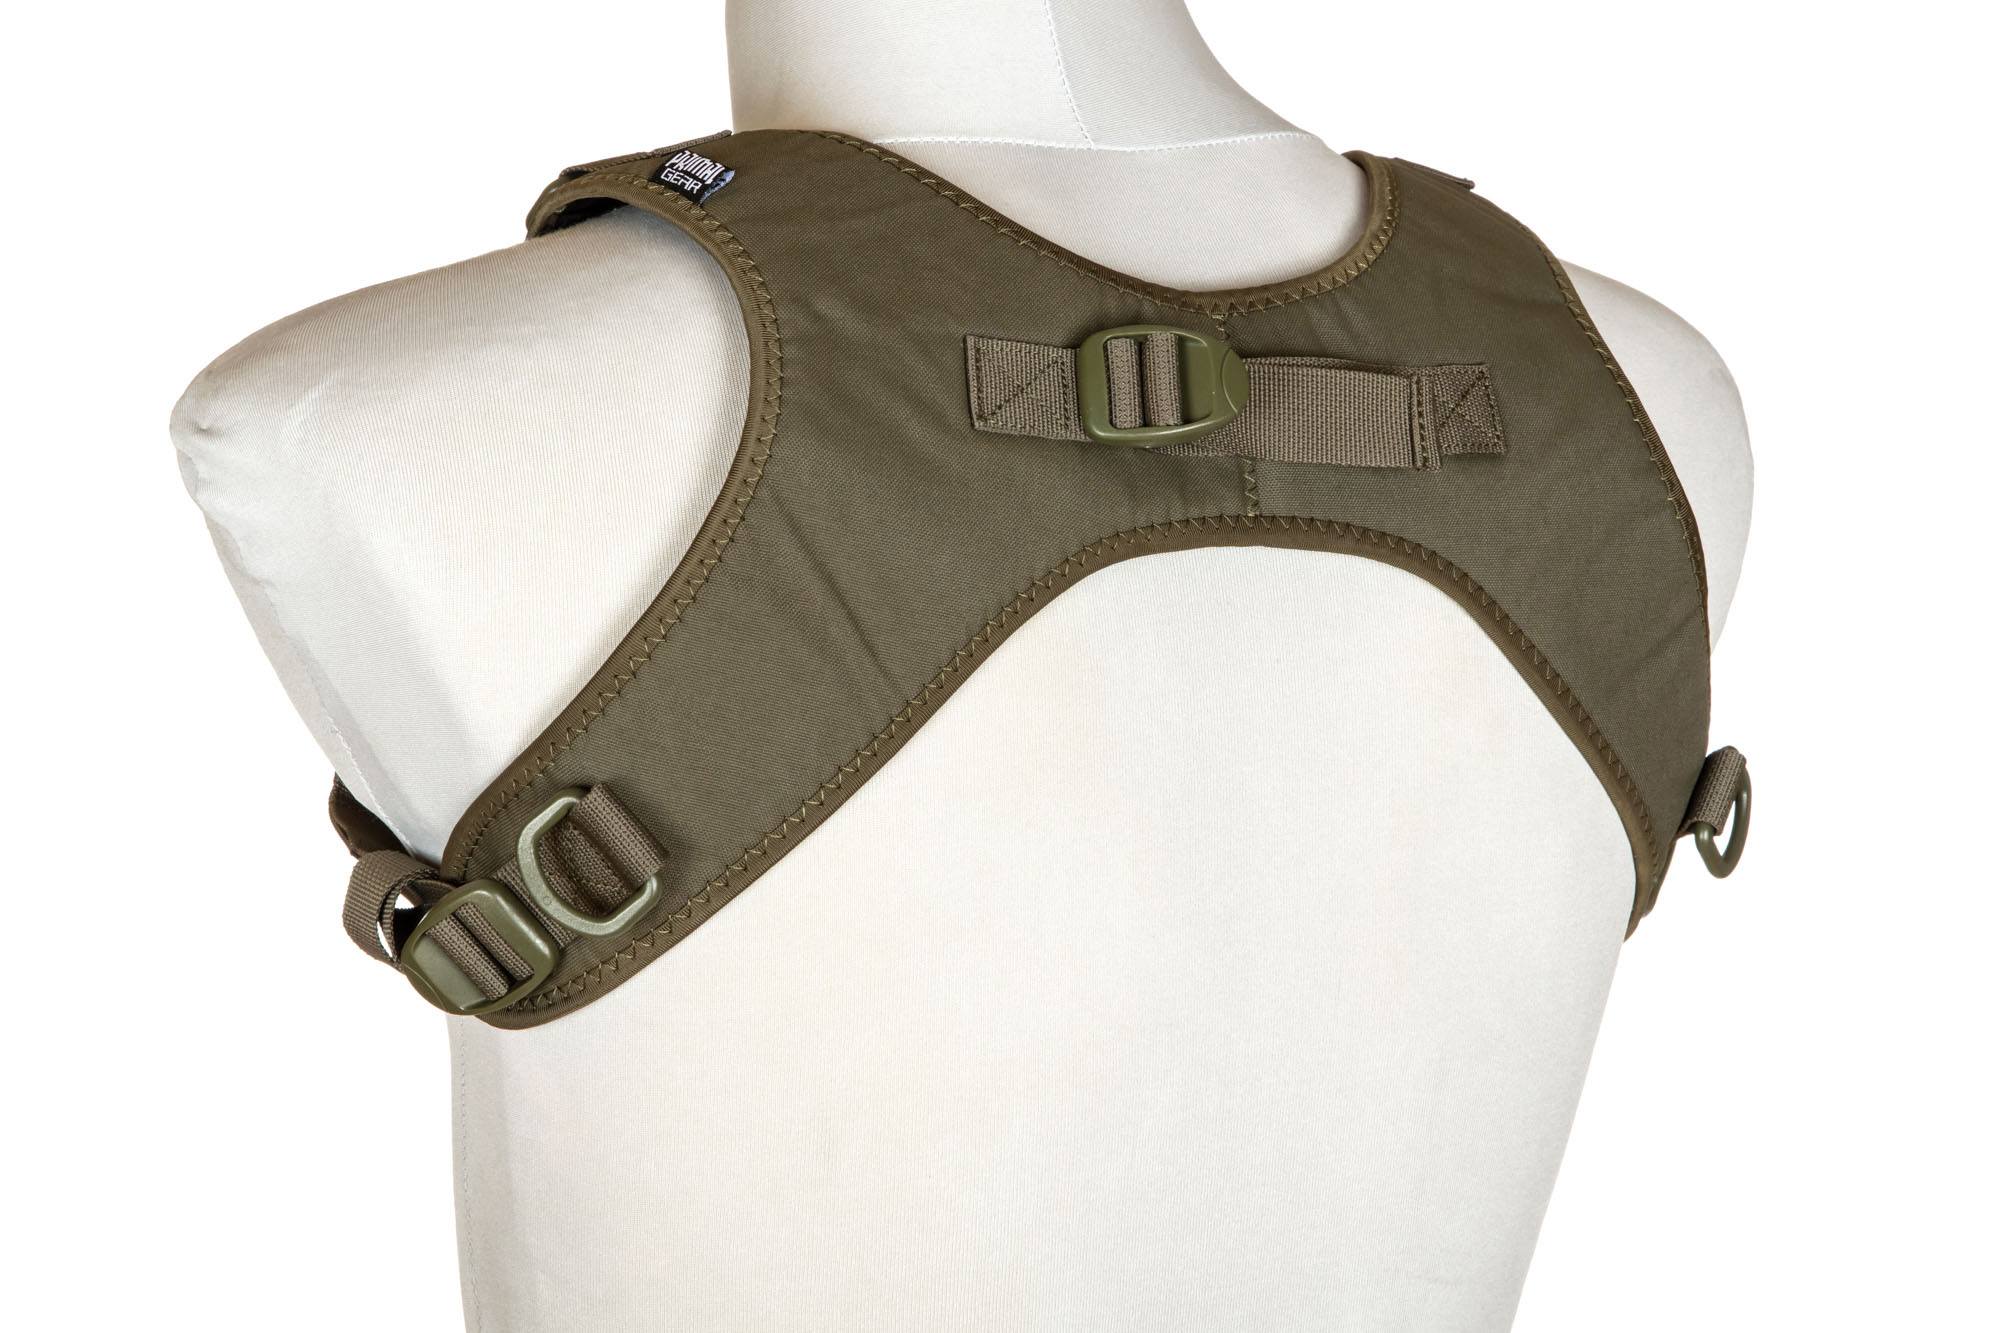 Sling Harness Tacotherium - Olive